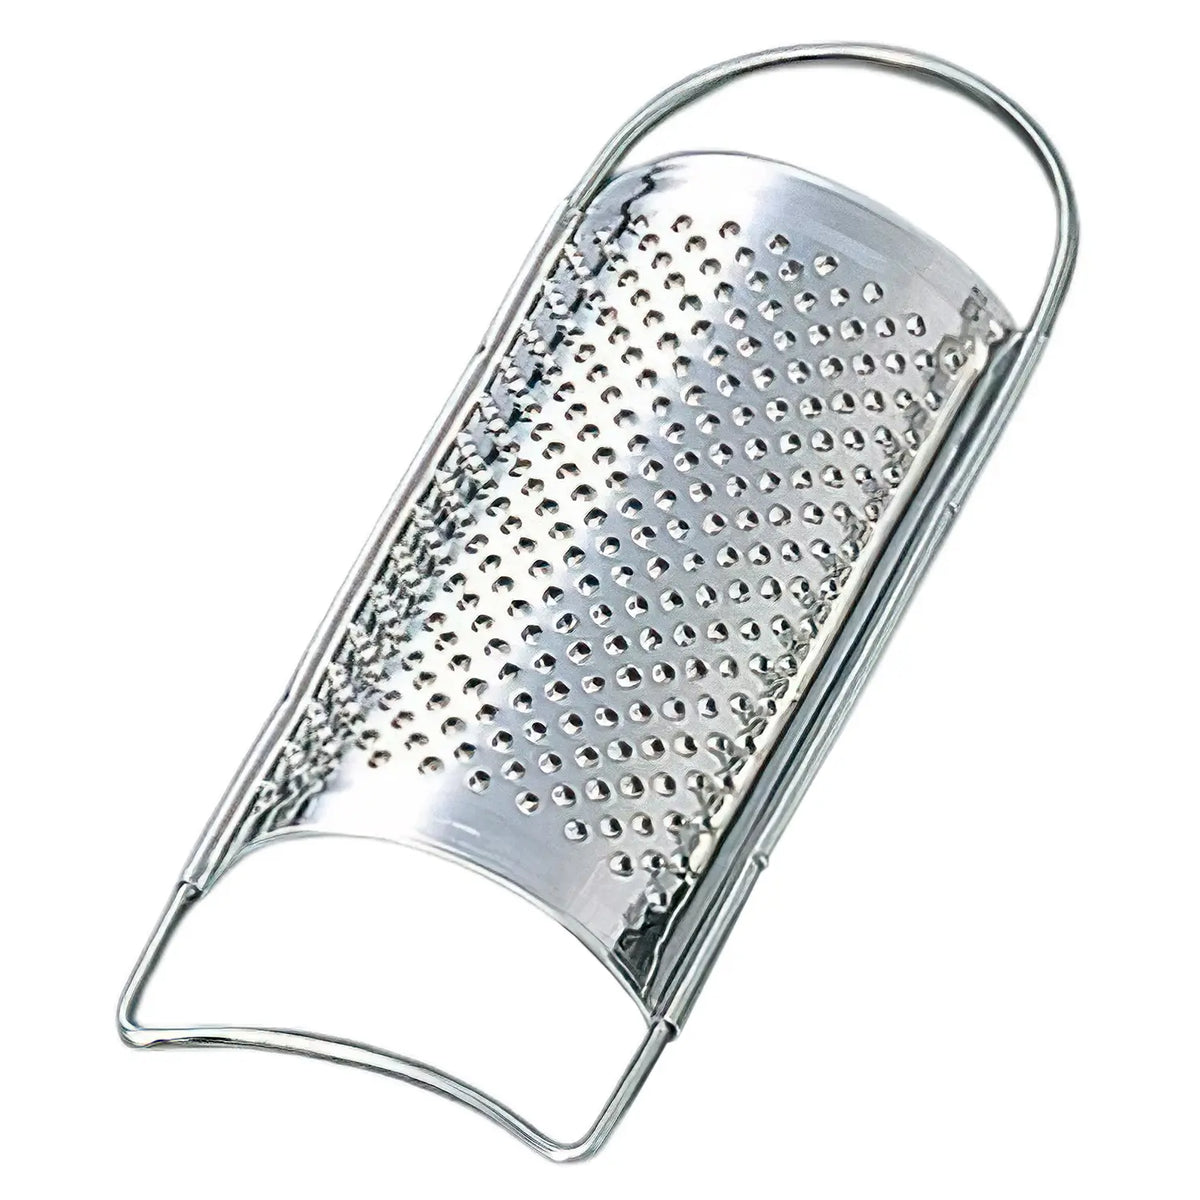 TKG Stainless Steel Cheese Grater